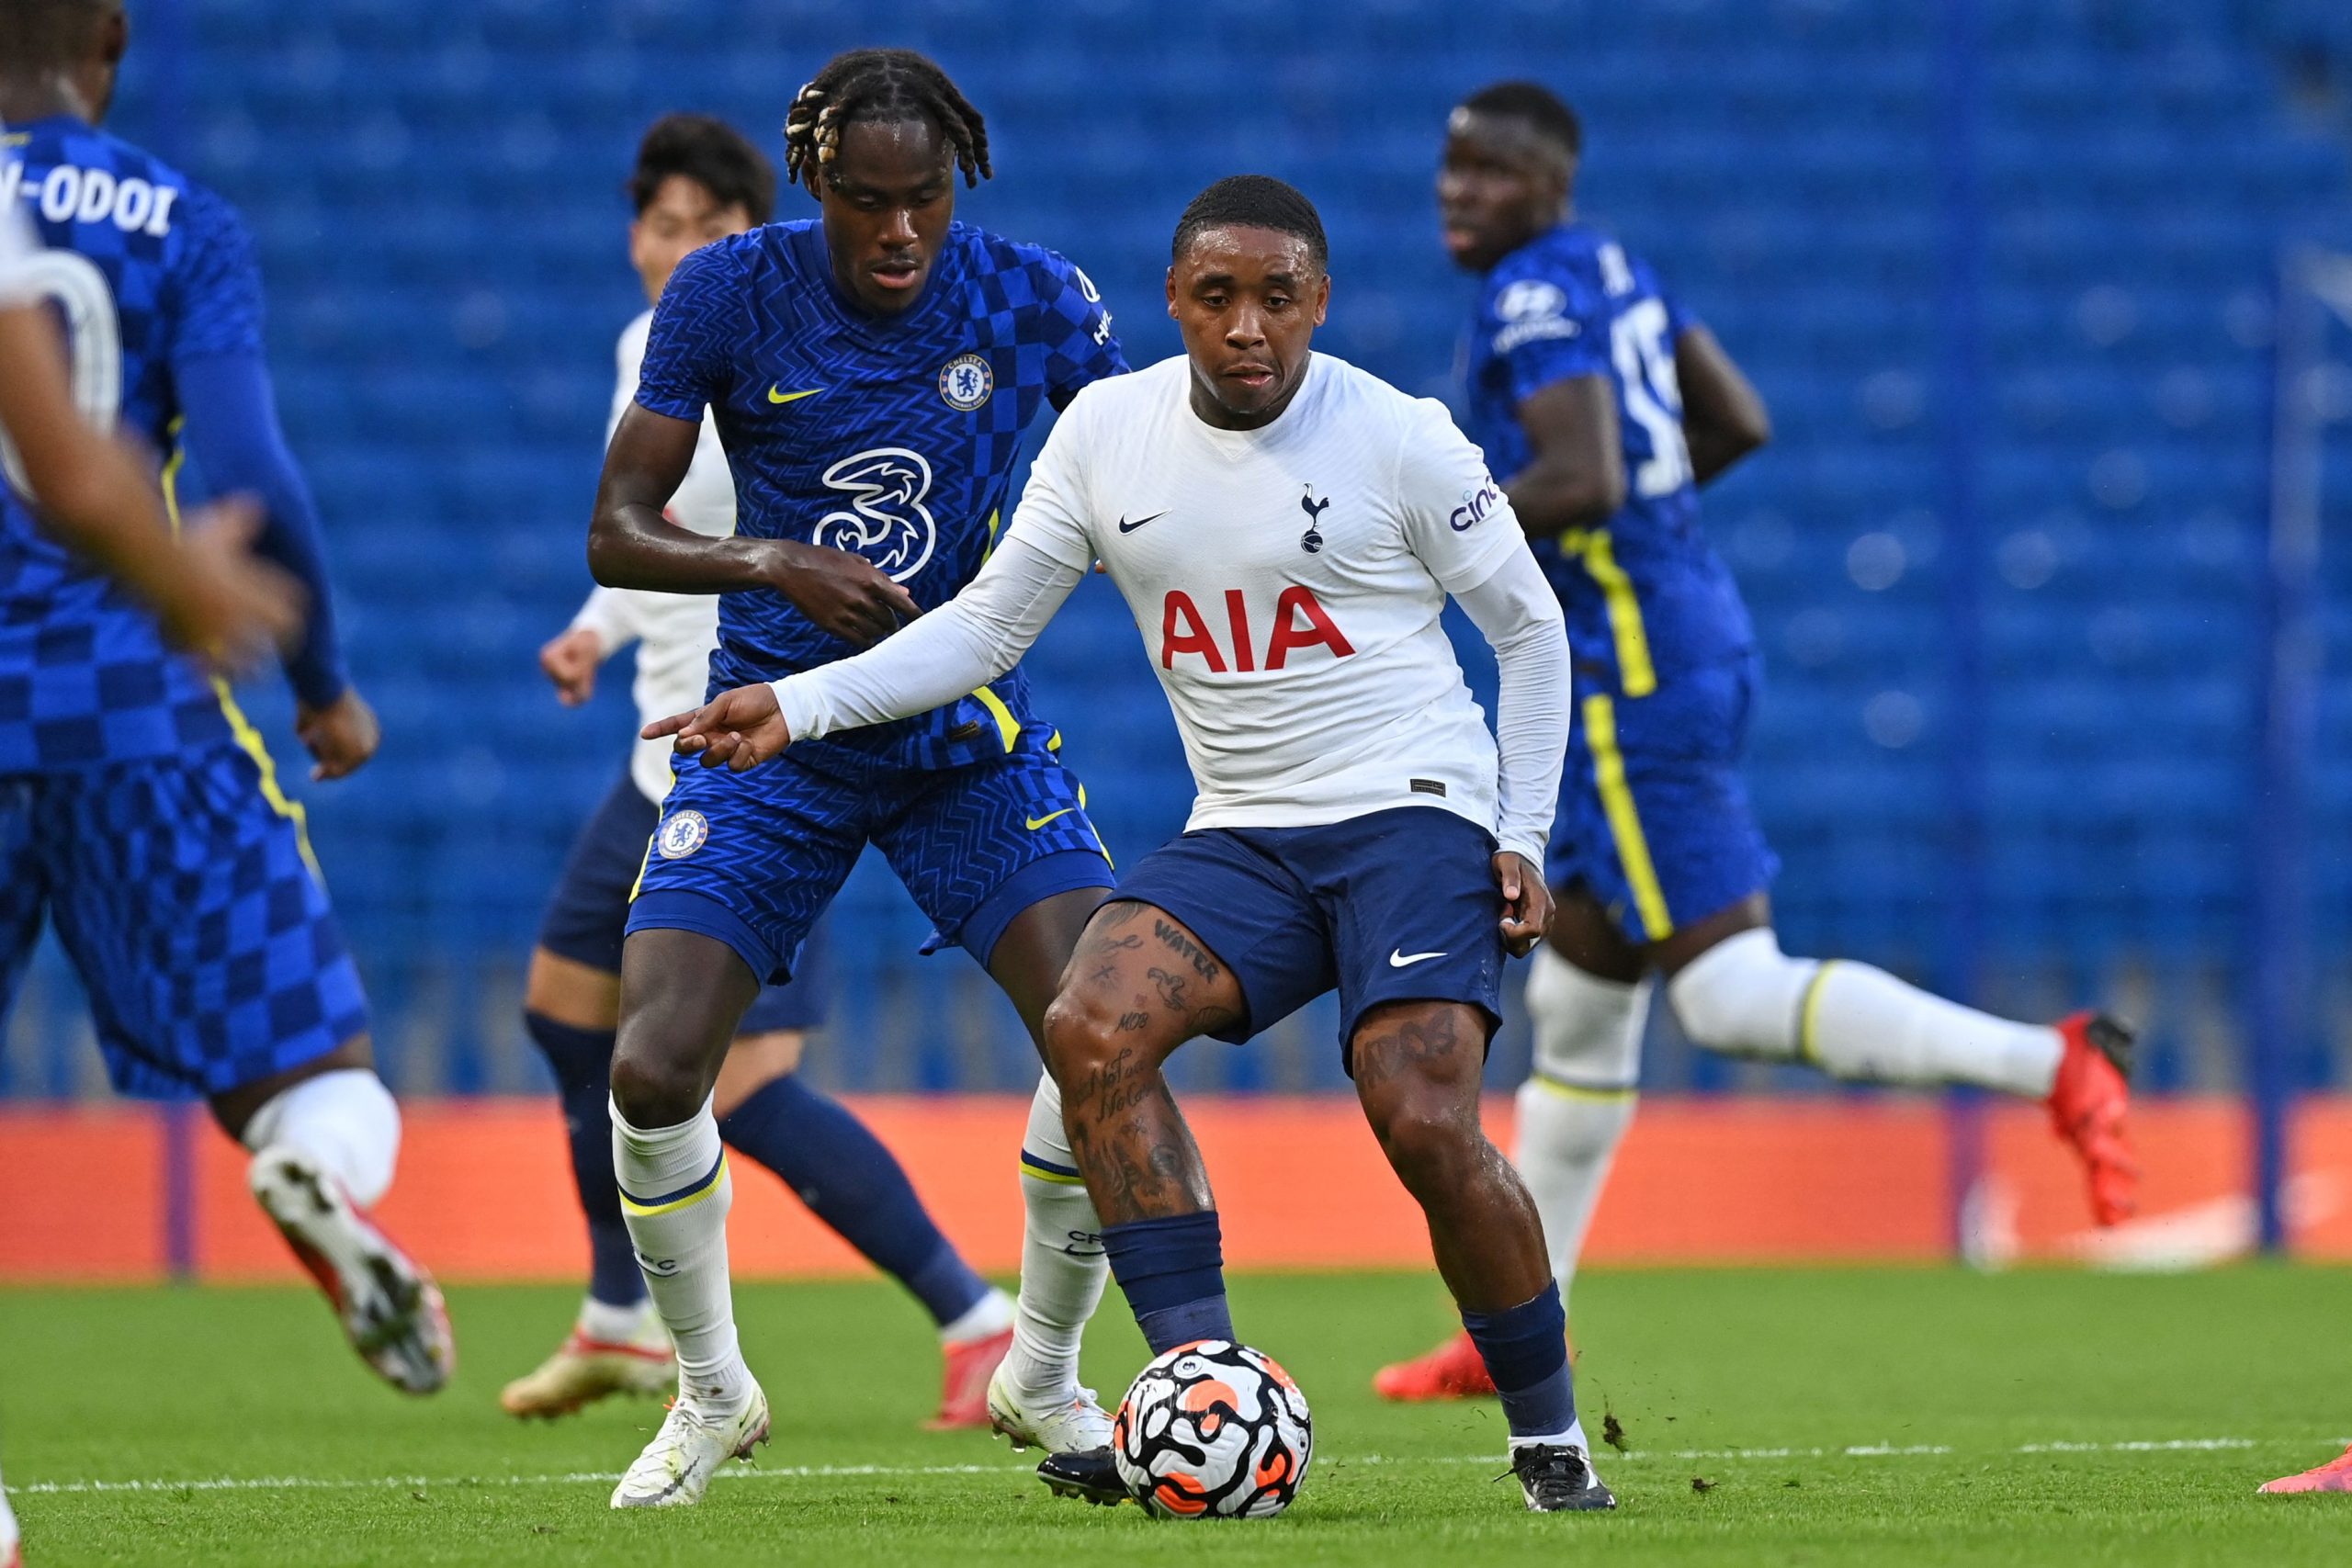 Steven Bergwijn vies with Trevoh Chalobah during a pre-season friendly.